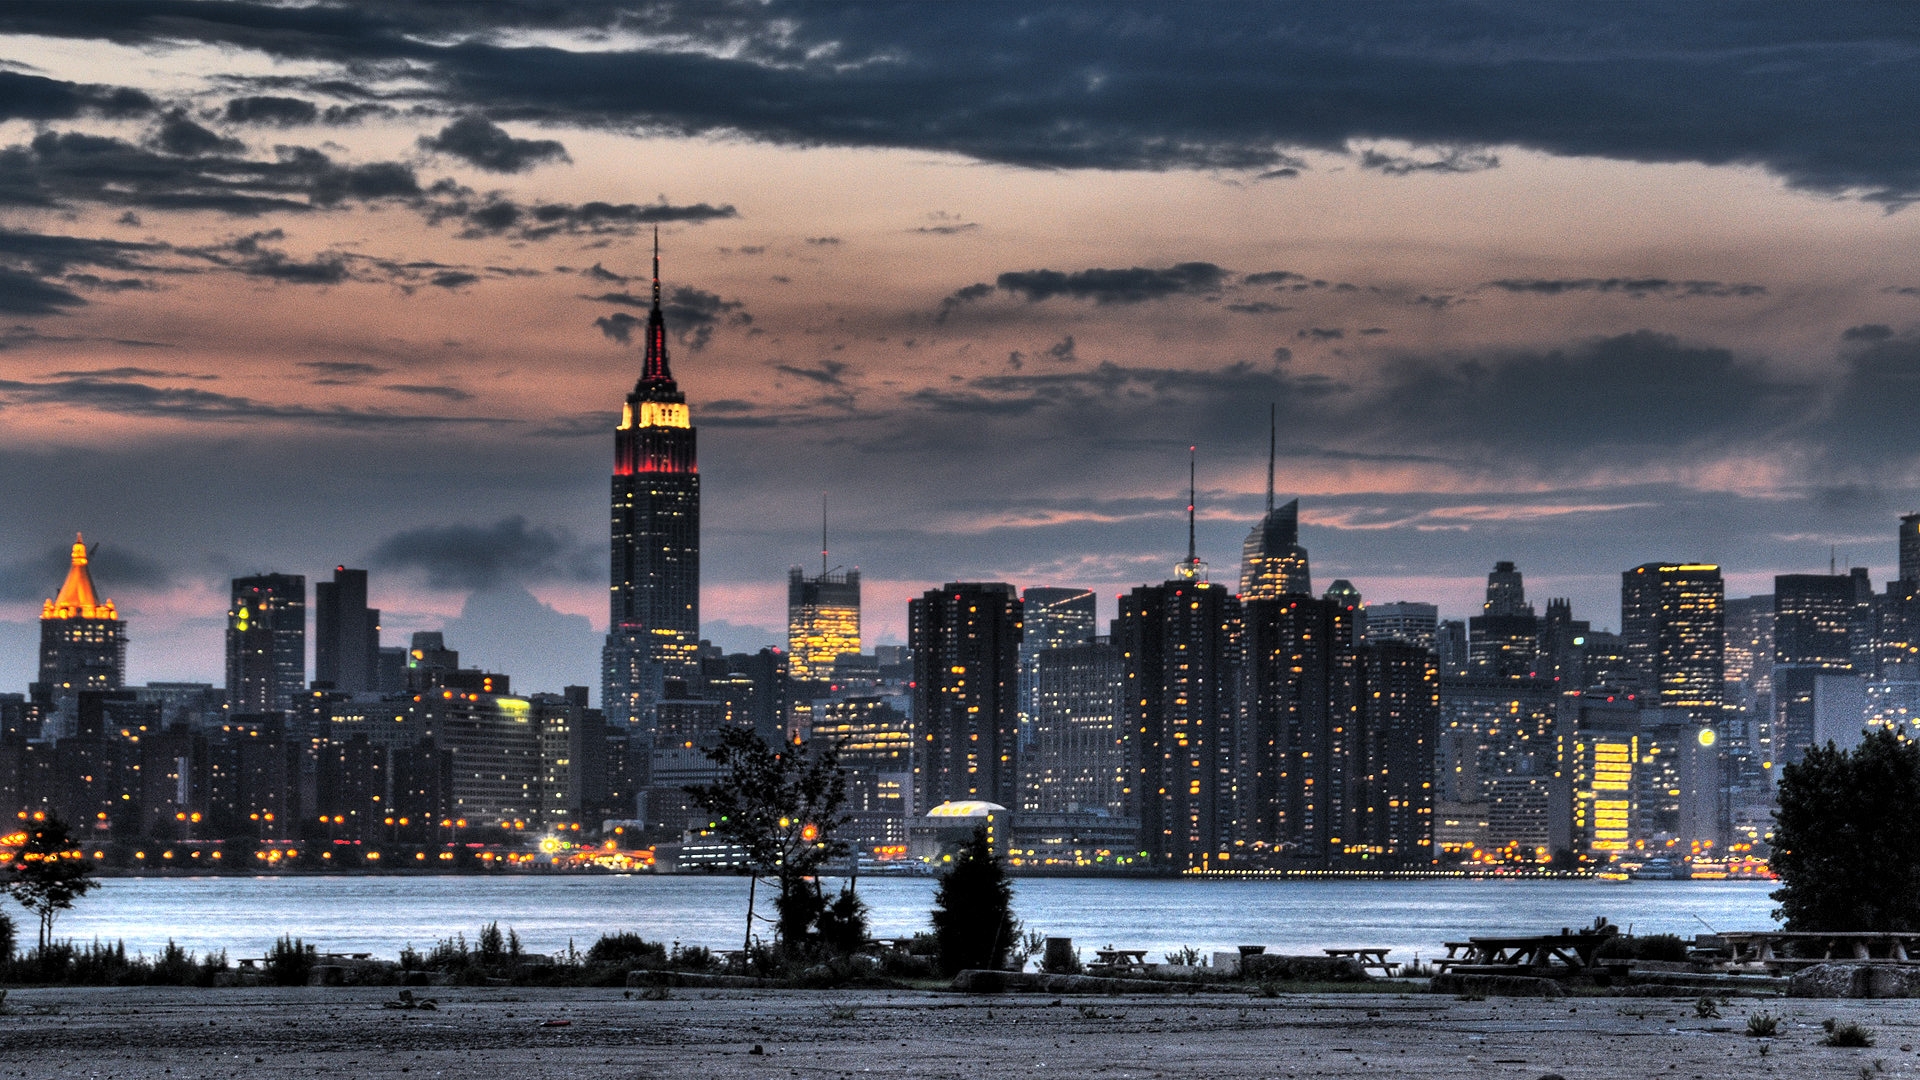 Background of Empire State Building for 1920 x 1080 HDTV 1080p resolution